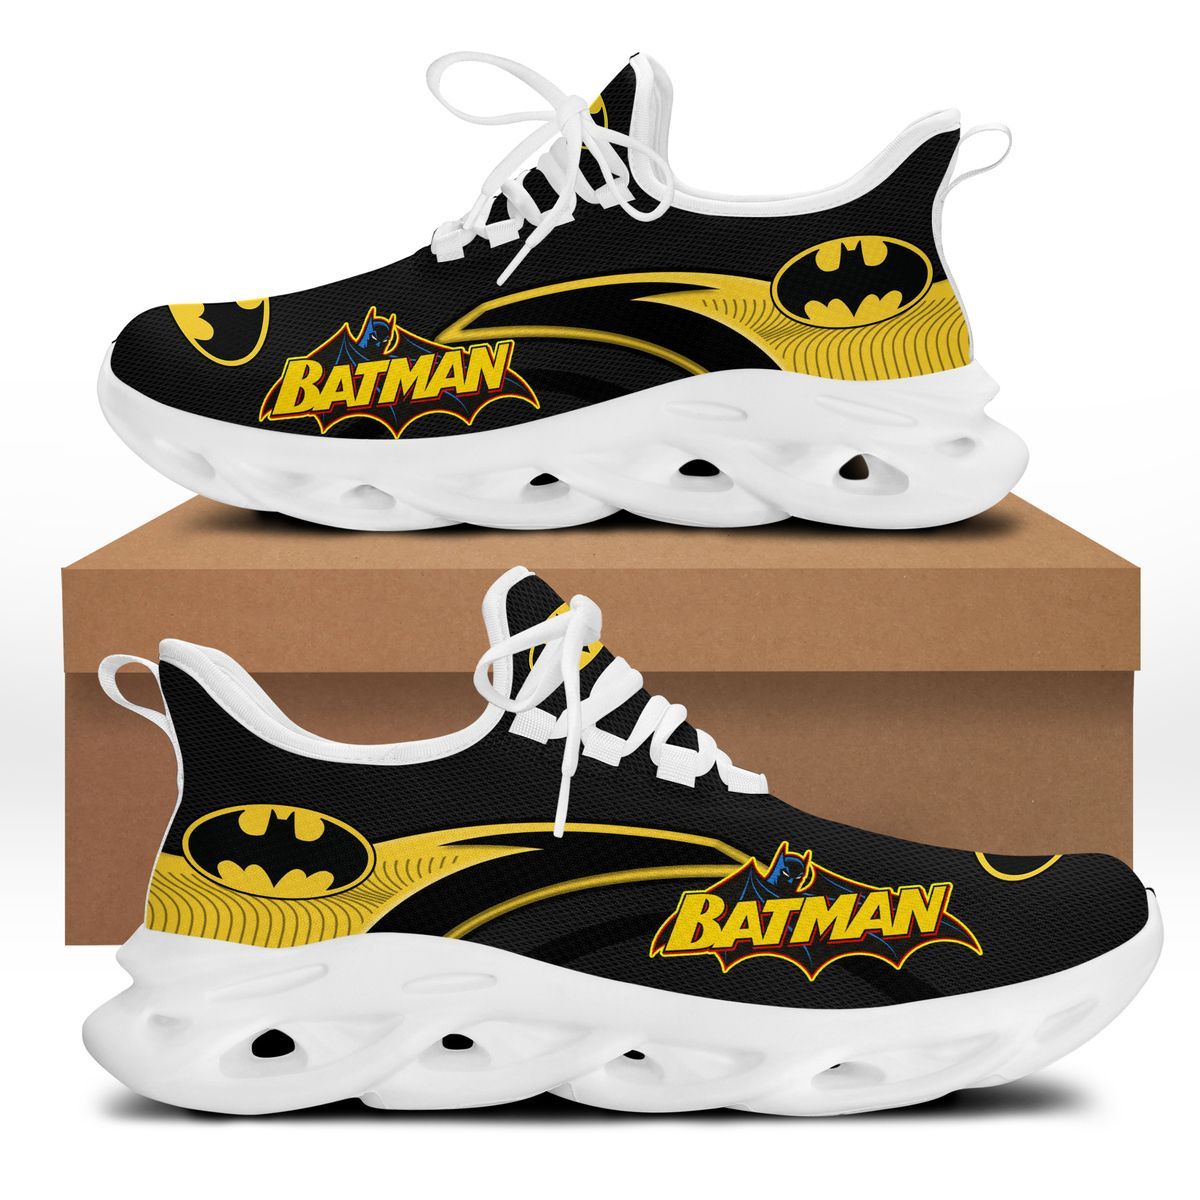 Batman Clunky Max soul shoes – LIMITED EDITION